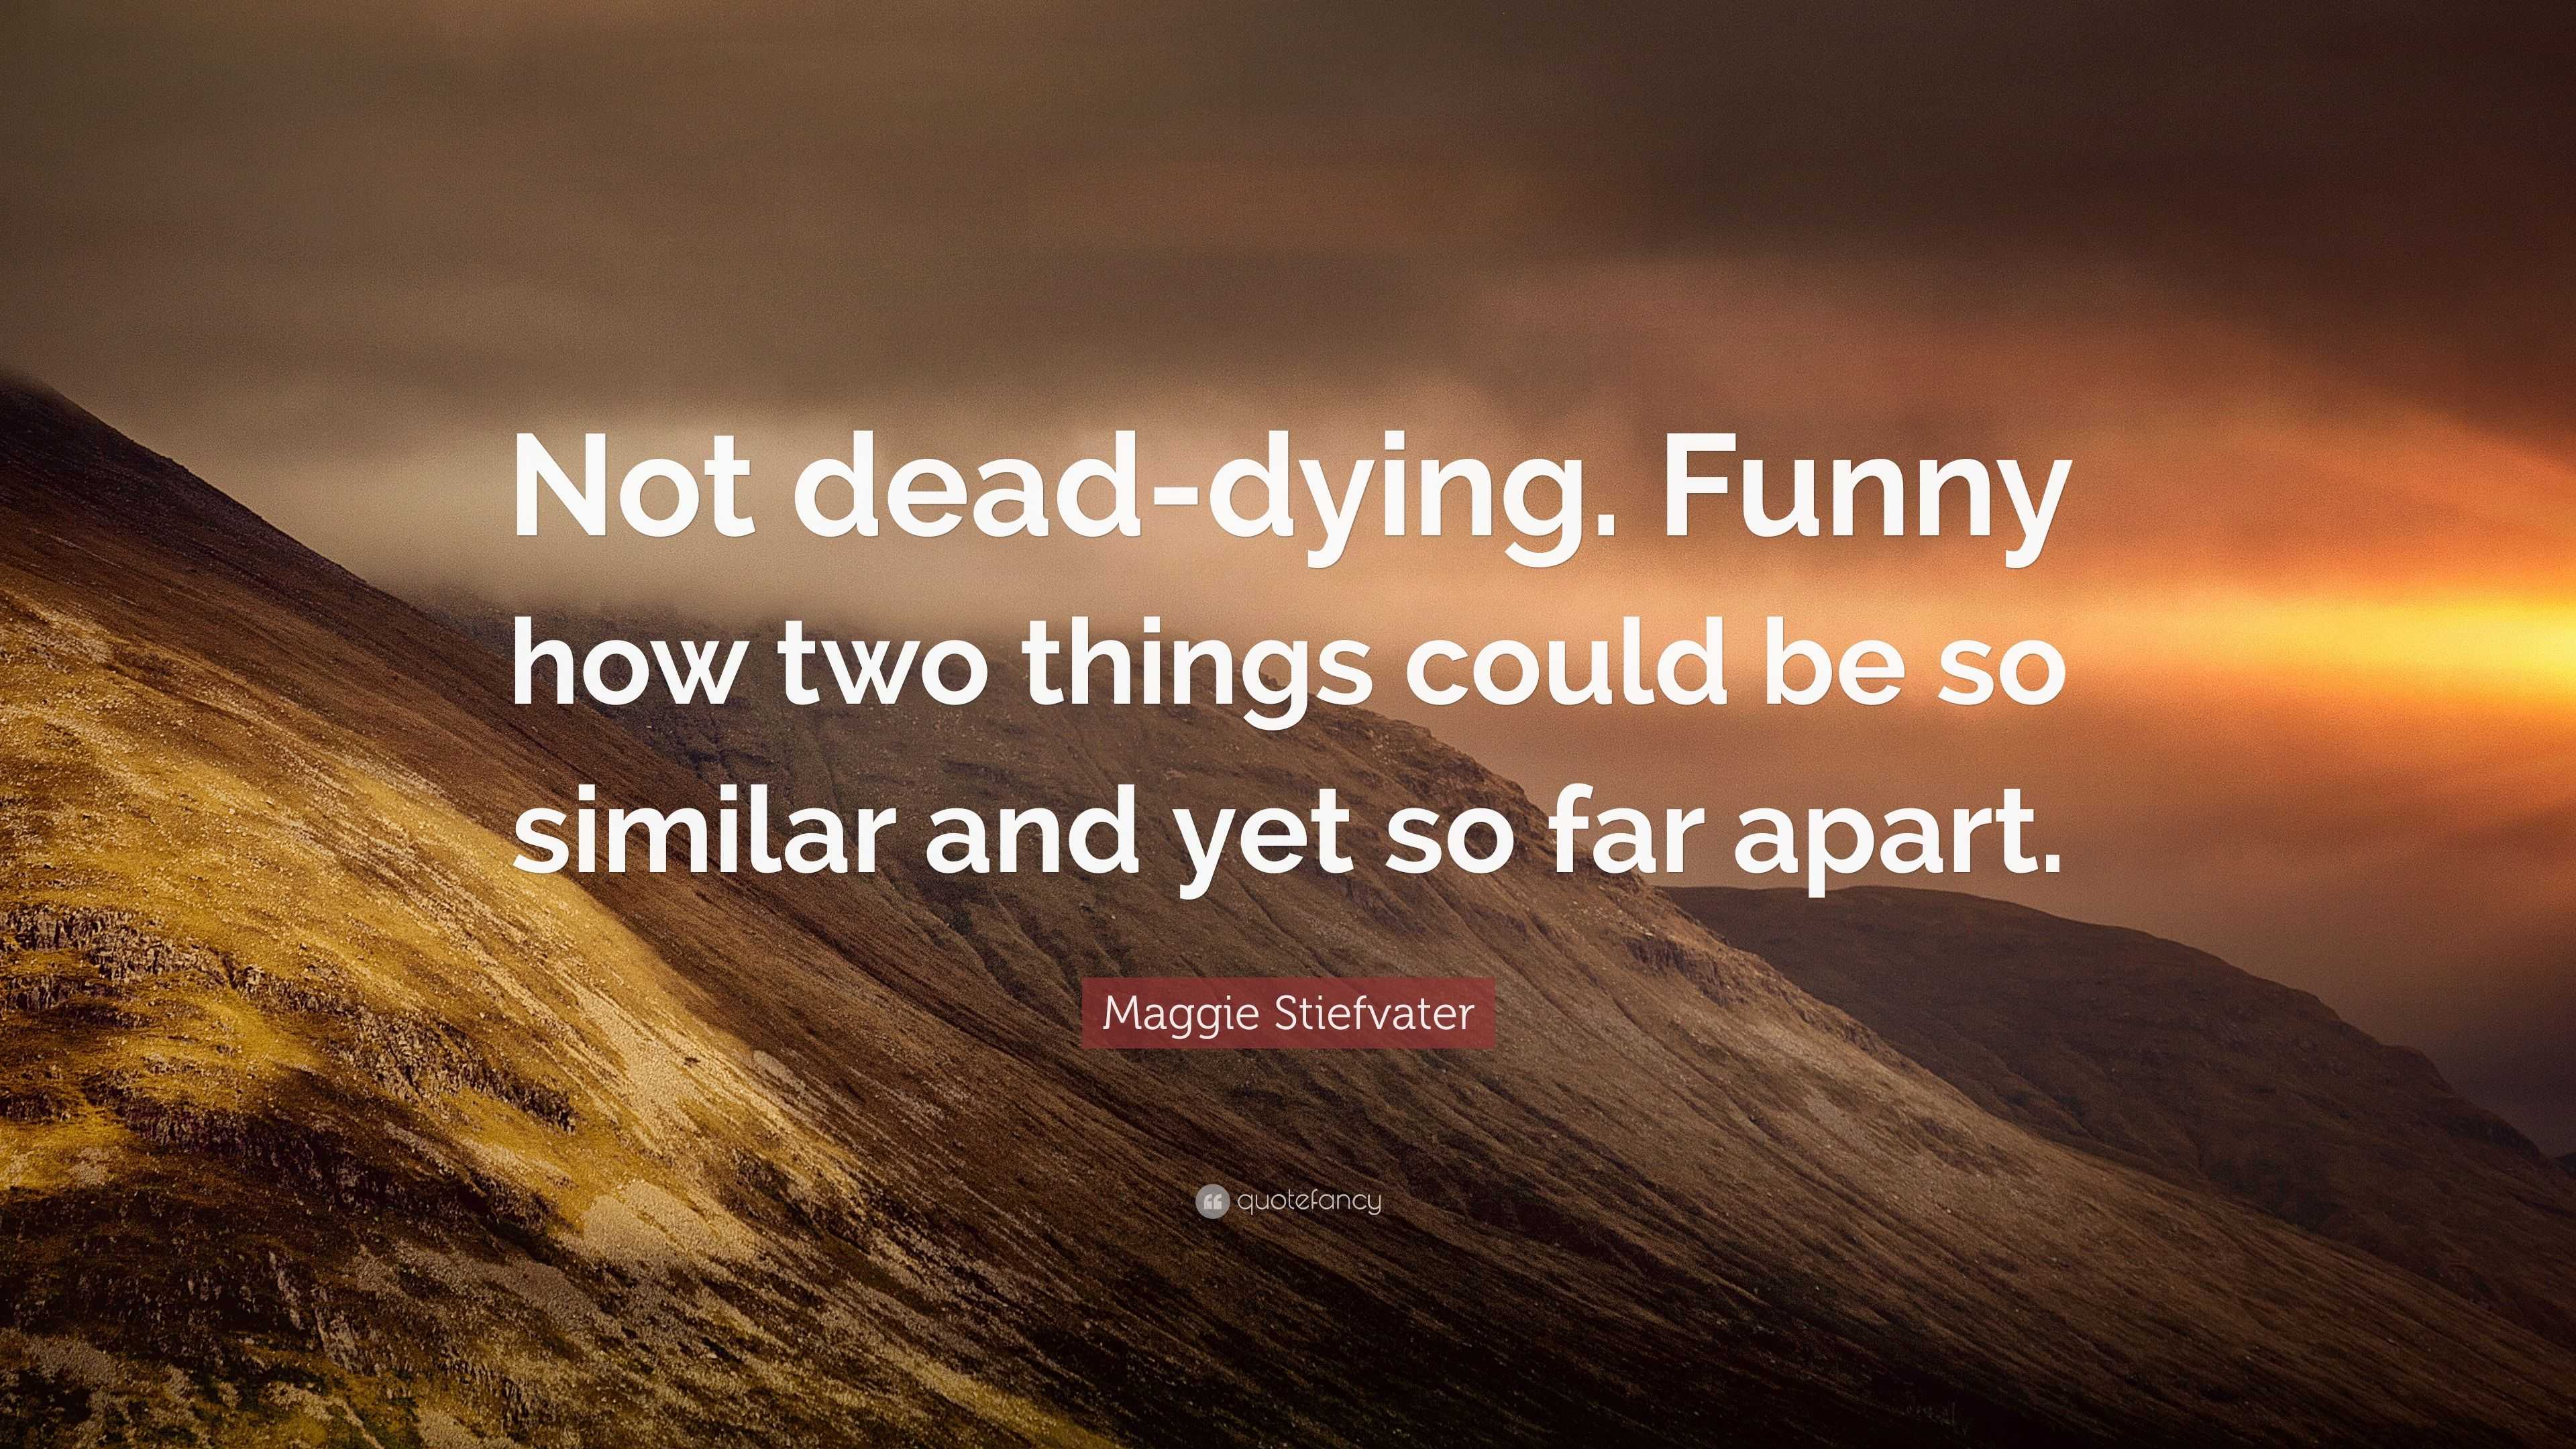 Maggie Stiefvater Quote: “Not dead-dying. Funny how two things could be so  similar and yet